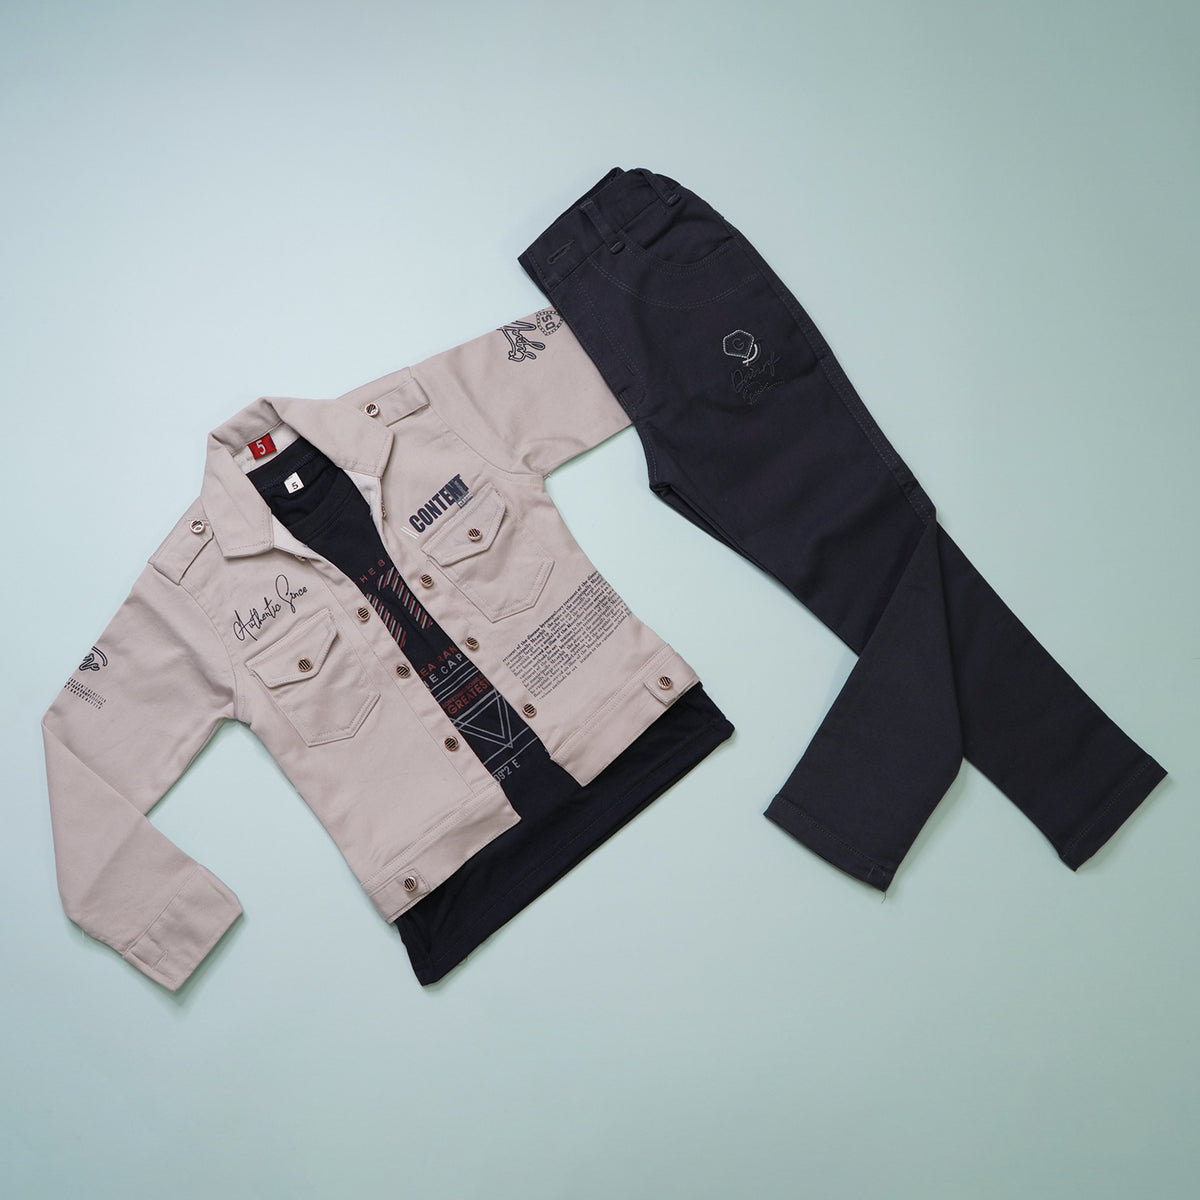 Boys Fancy Over Coat and Pant Set